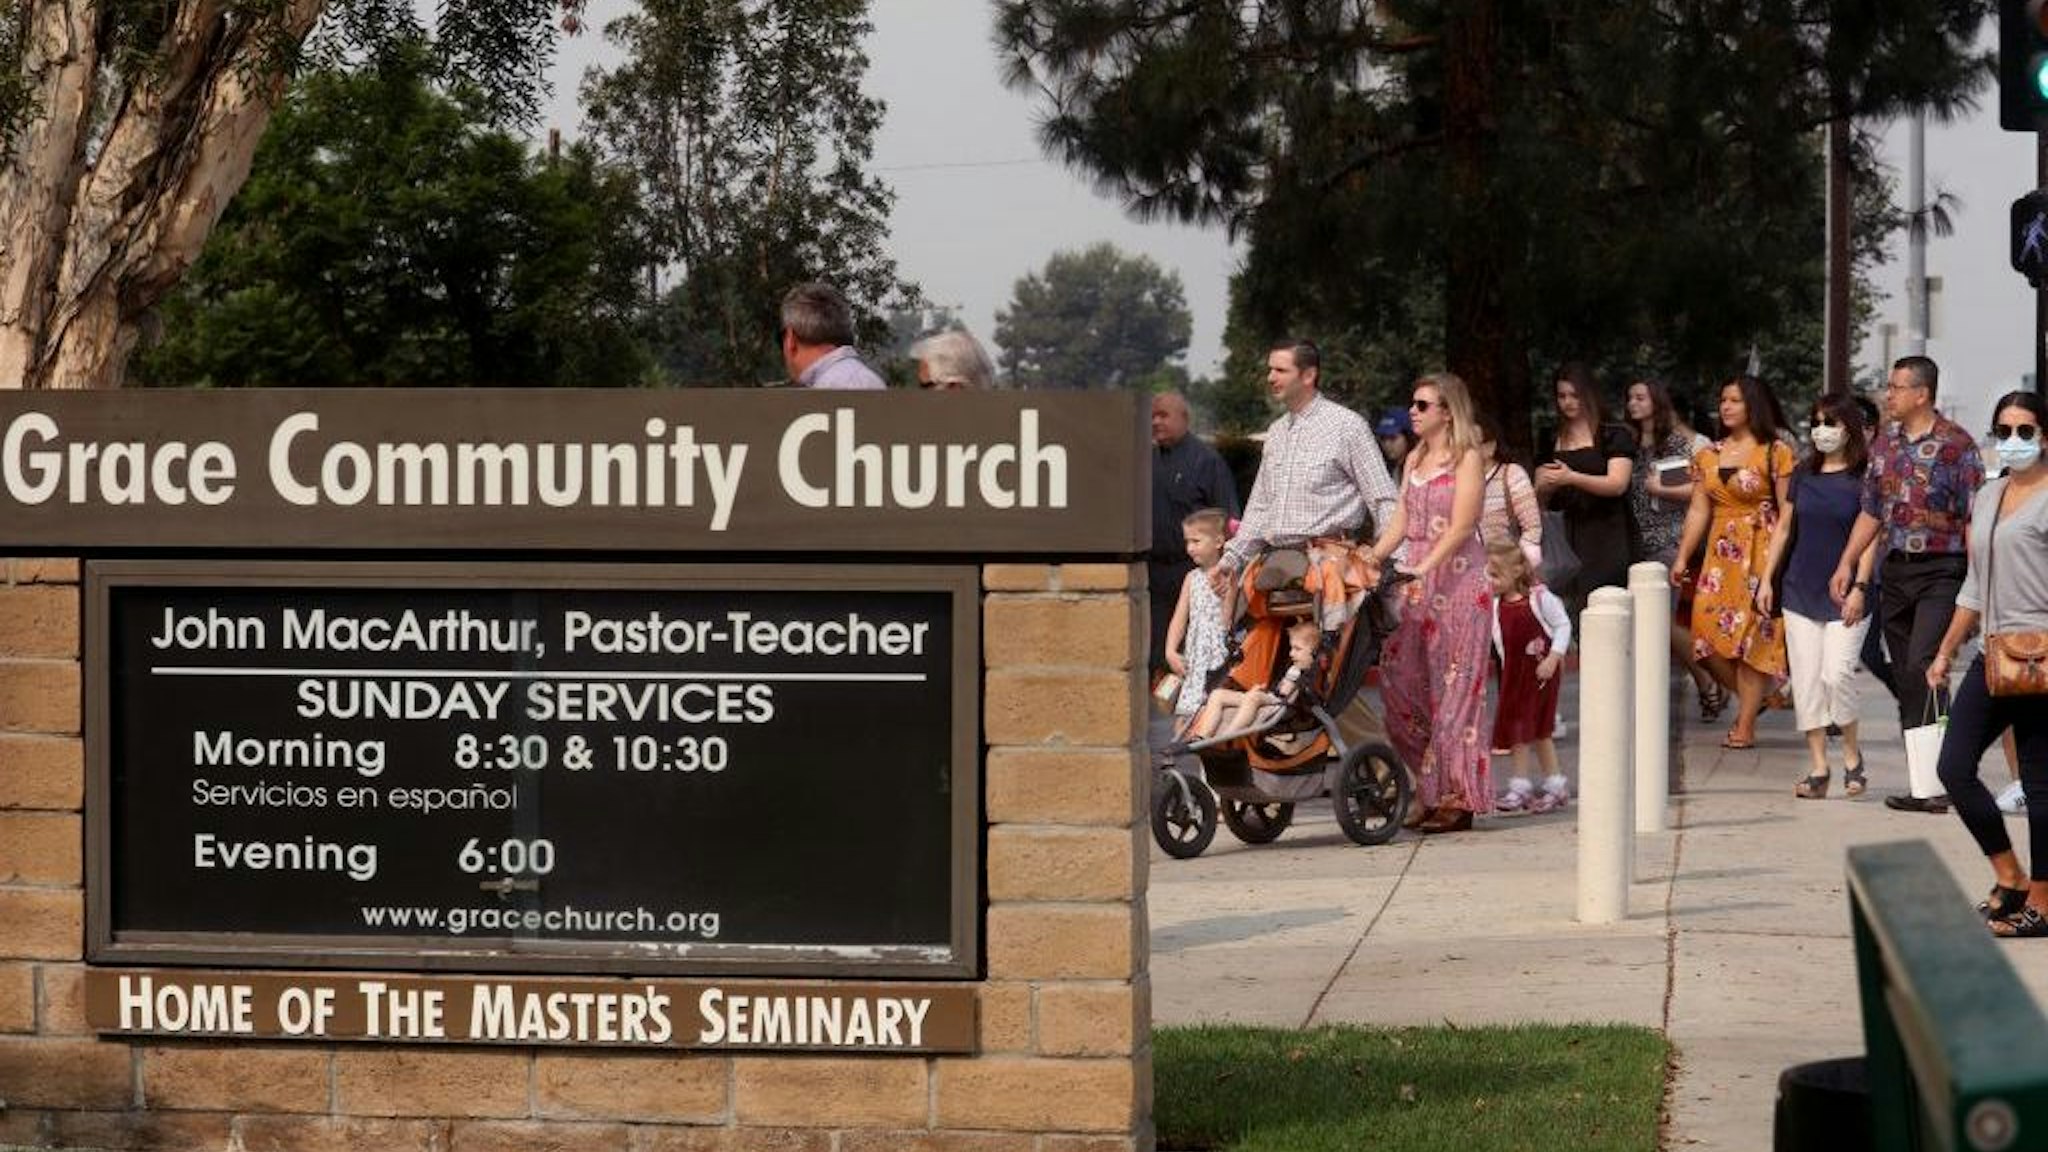 Grace Community Church parishioners make their way to Sunday service in Sun Valley on September 13, 2020. The church held a packed morning service today, defying a court order directing them to refrain from holding indoor services due to the COVID-19 pandemic. (Genaro Molina/Los Angeles Times)